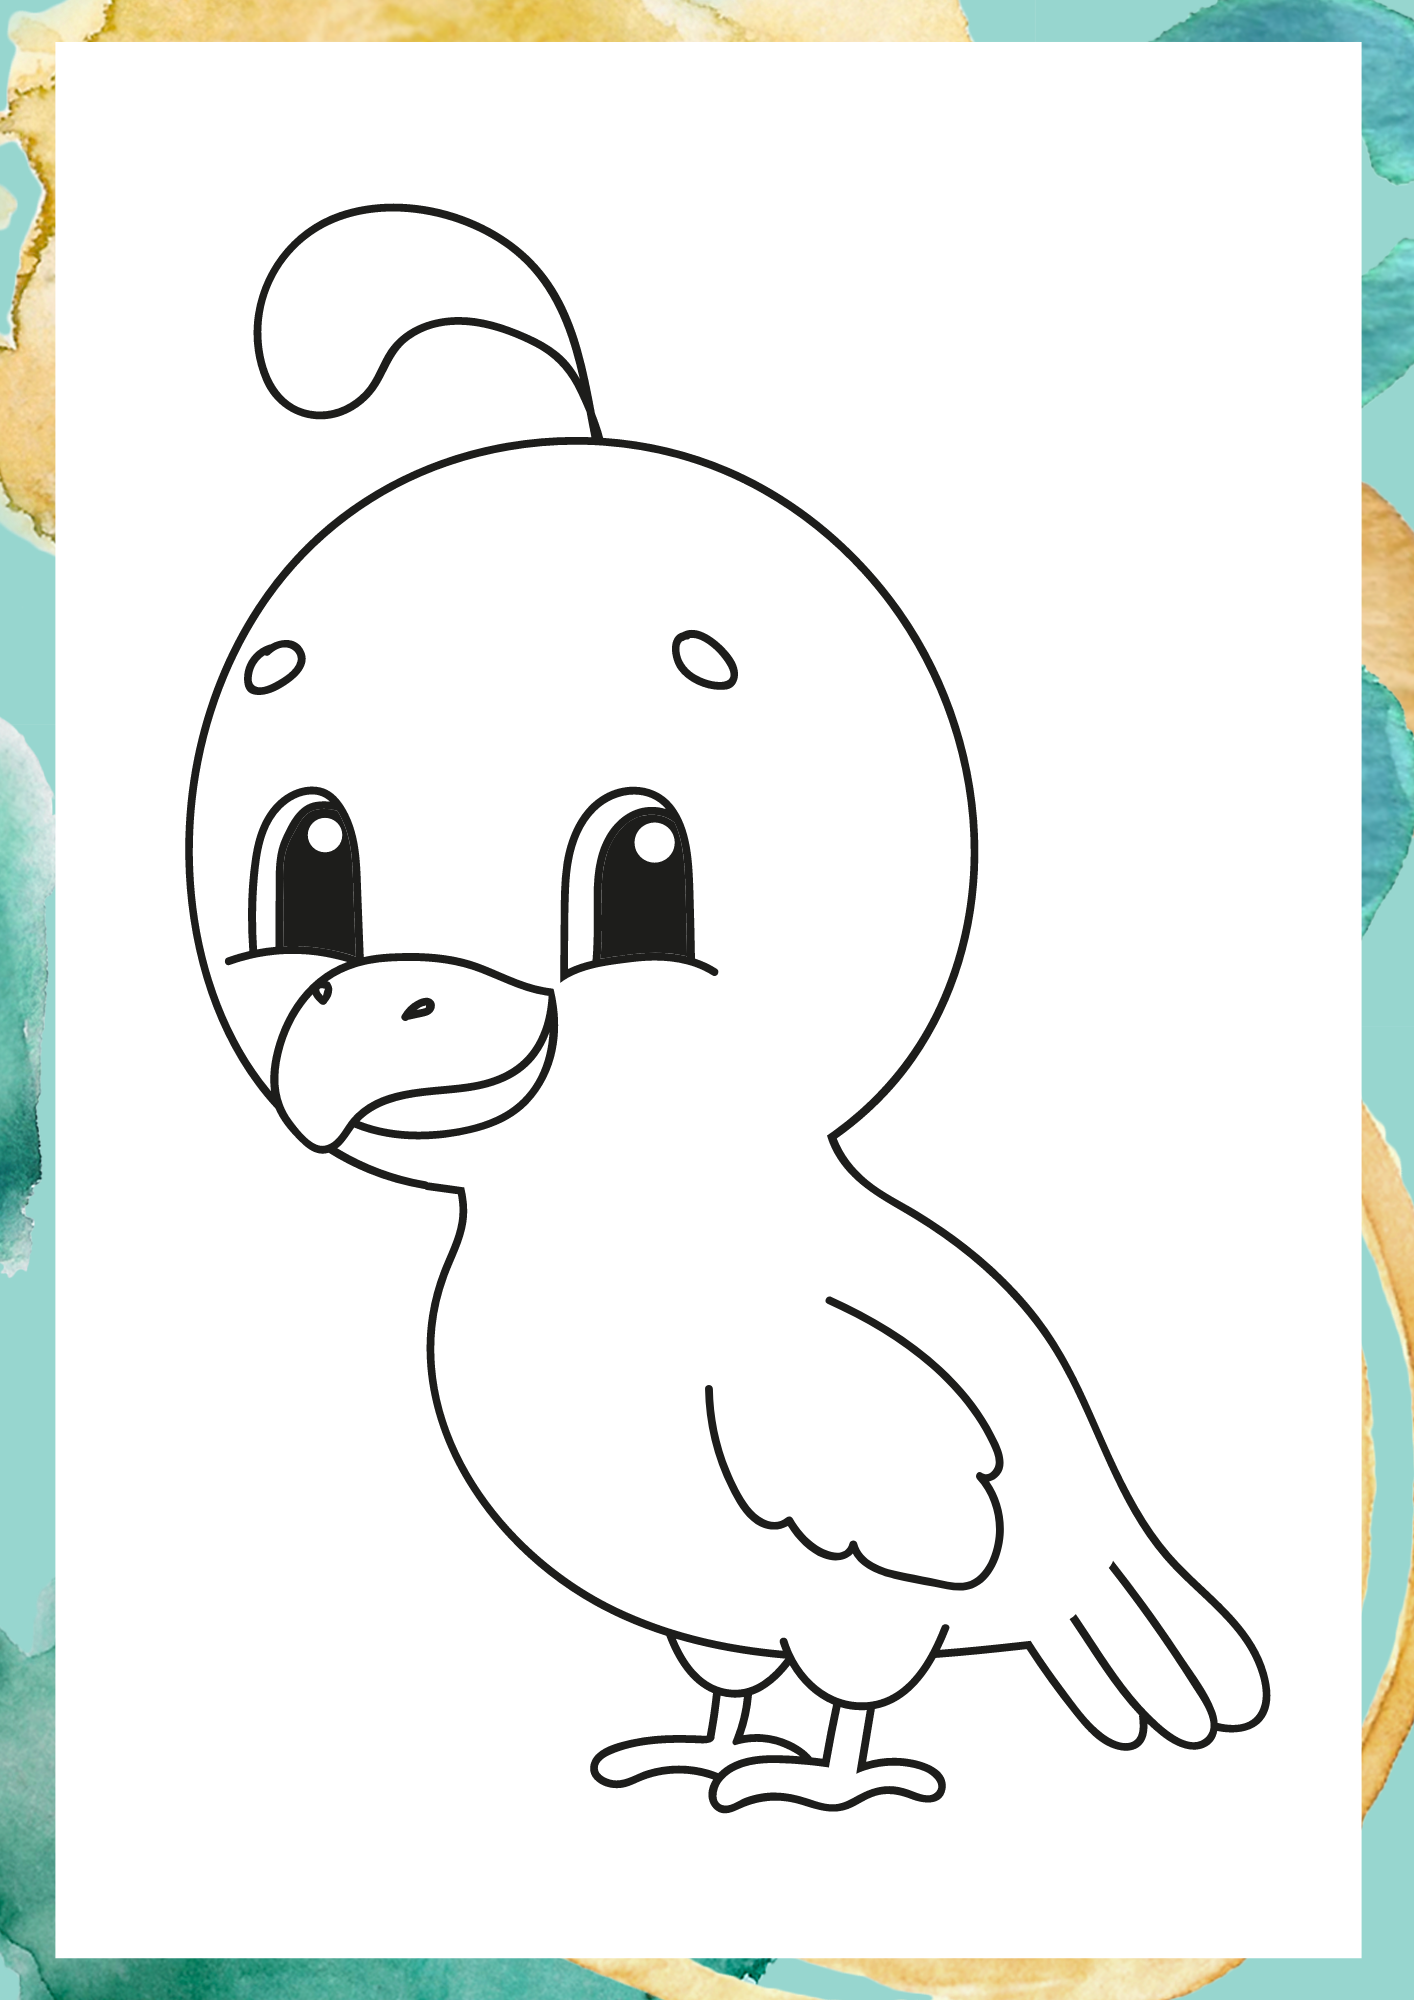 sparrow coloring page, bird coloring page, coloring page, coloring page for toddlers,Coloring Page, coloring sheet, happy color, colouring, free coloring pages, coloring pages for kids, printable coloring pages, cute coloring pages, colouring pages, colouring to print, free printable coloring pages, free coloring pages for kids, easy coloring pages, coloring sheets